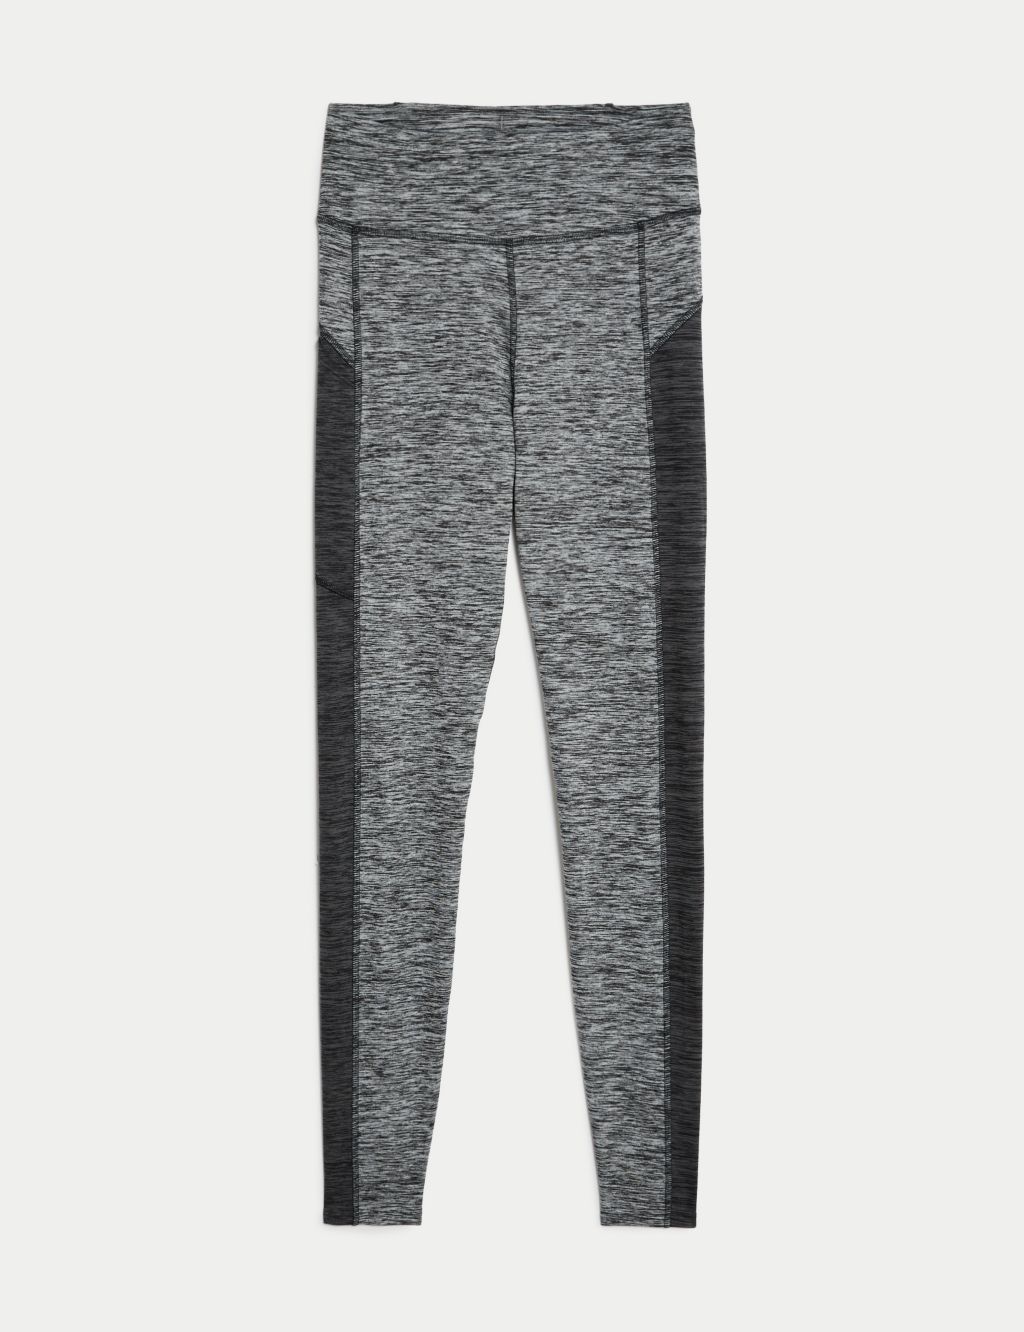 M&S' €36 Gym Leggings Will Go The Distance In Your Wardrobe